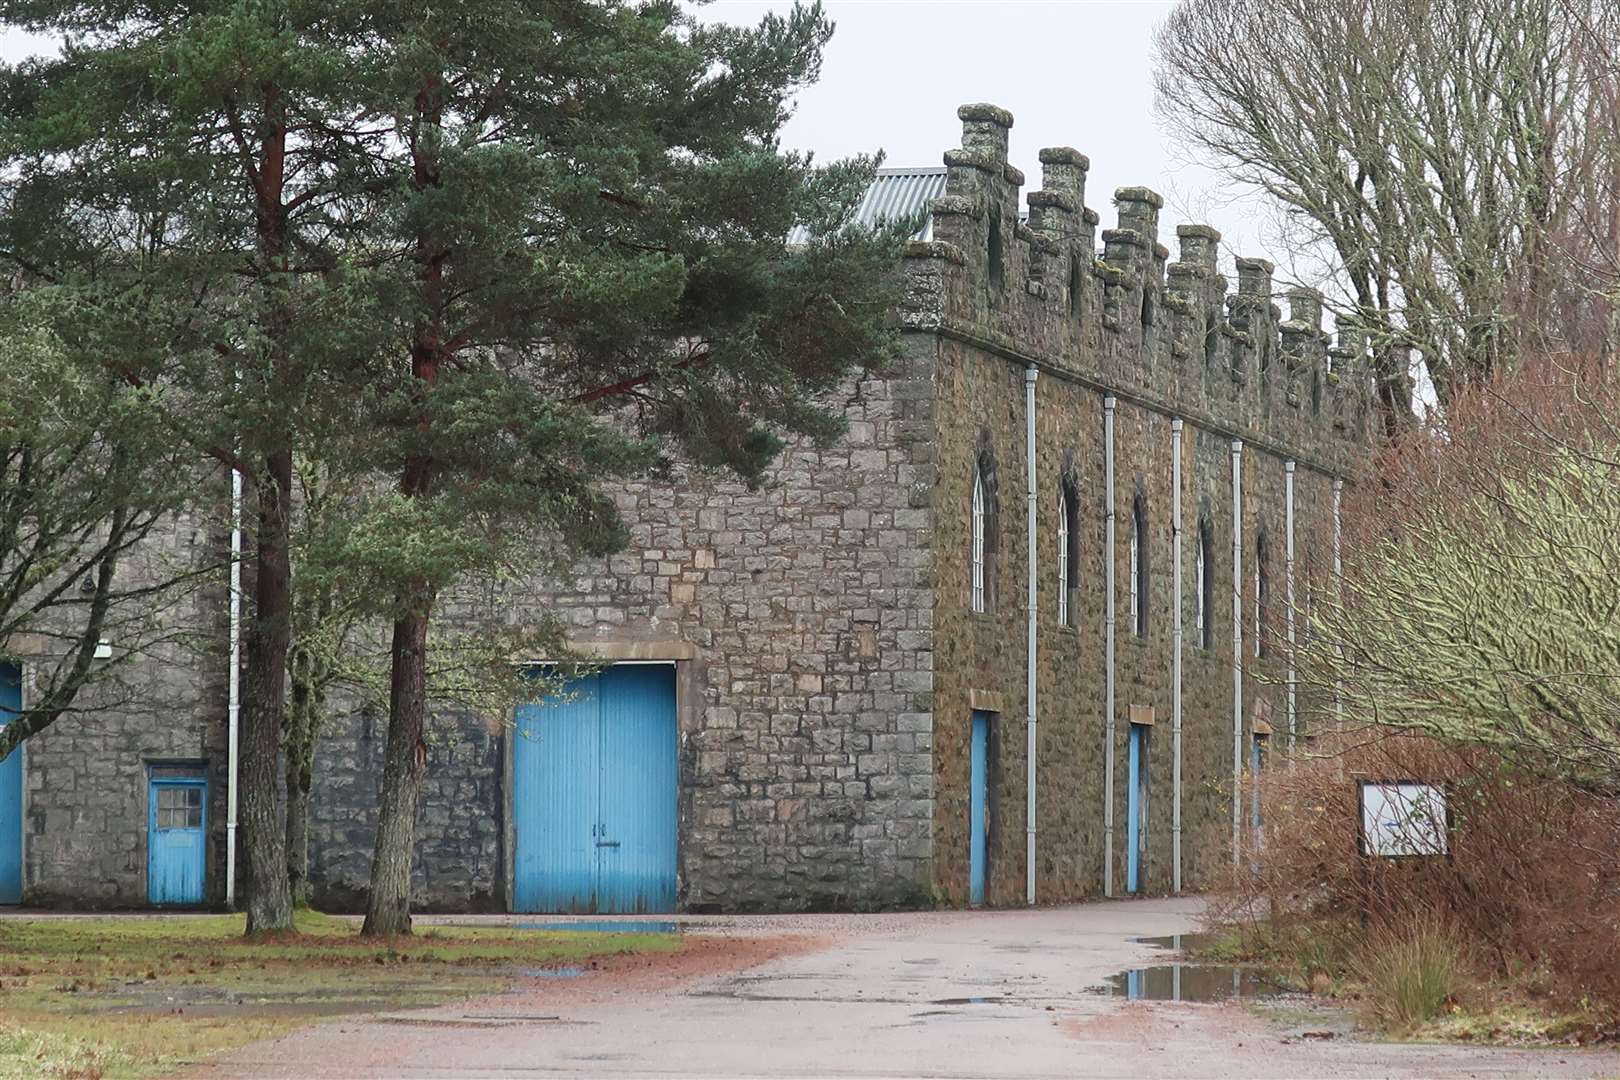 The former aluminium works at Lower Foyers.